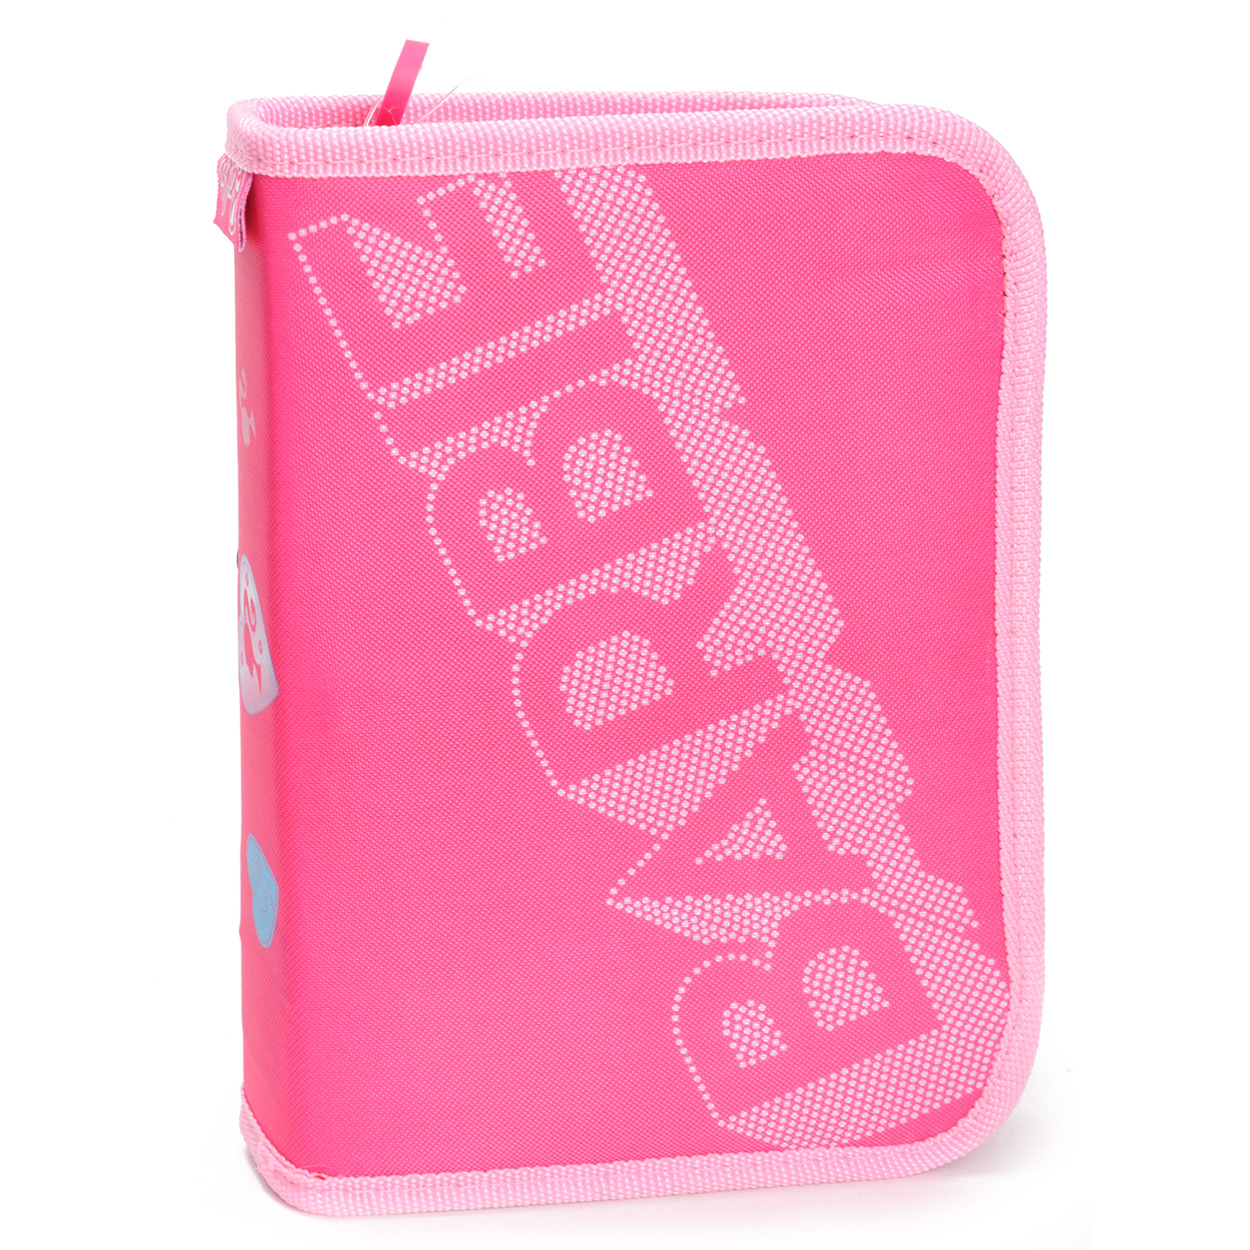 Barbie-Filled Pouch | Thimble Toys